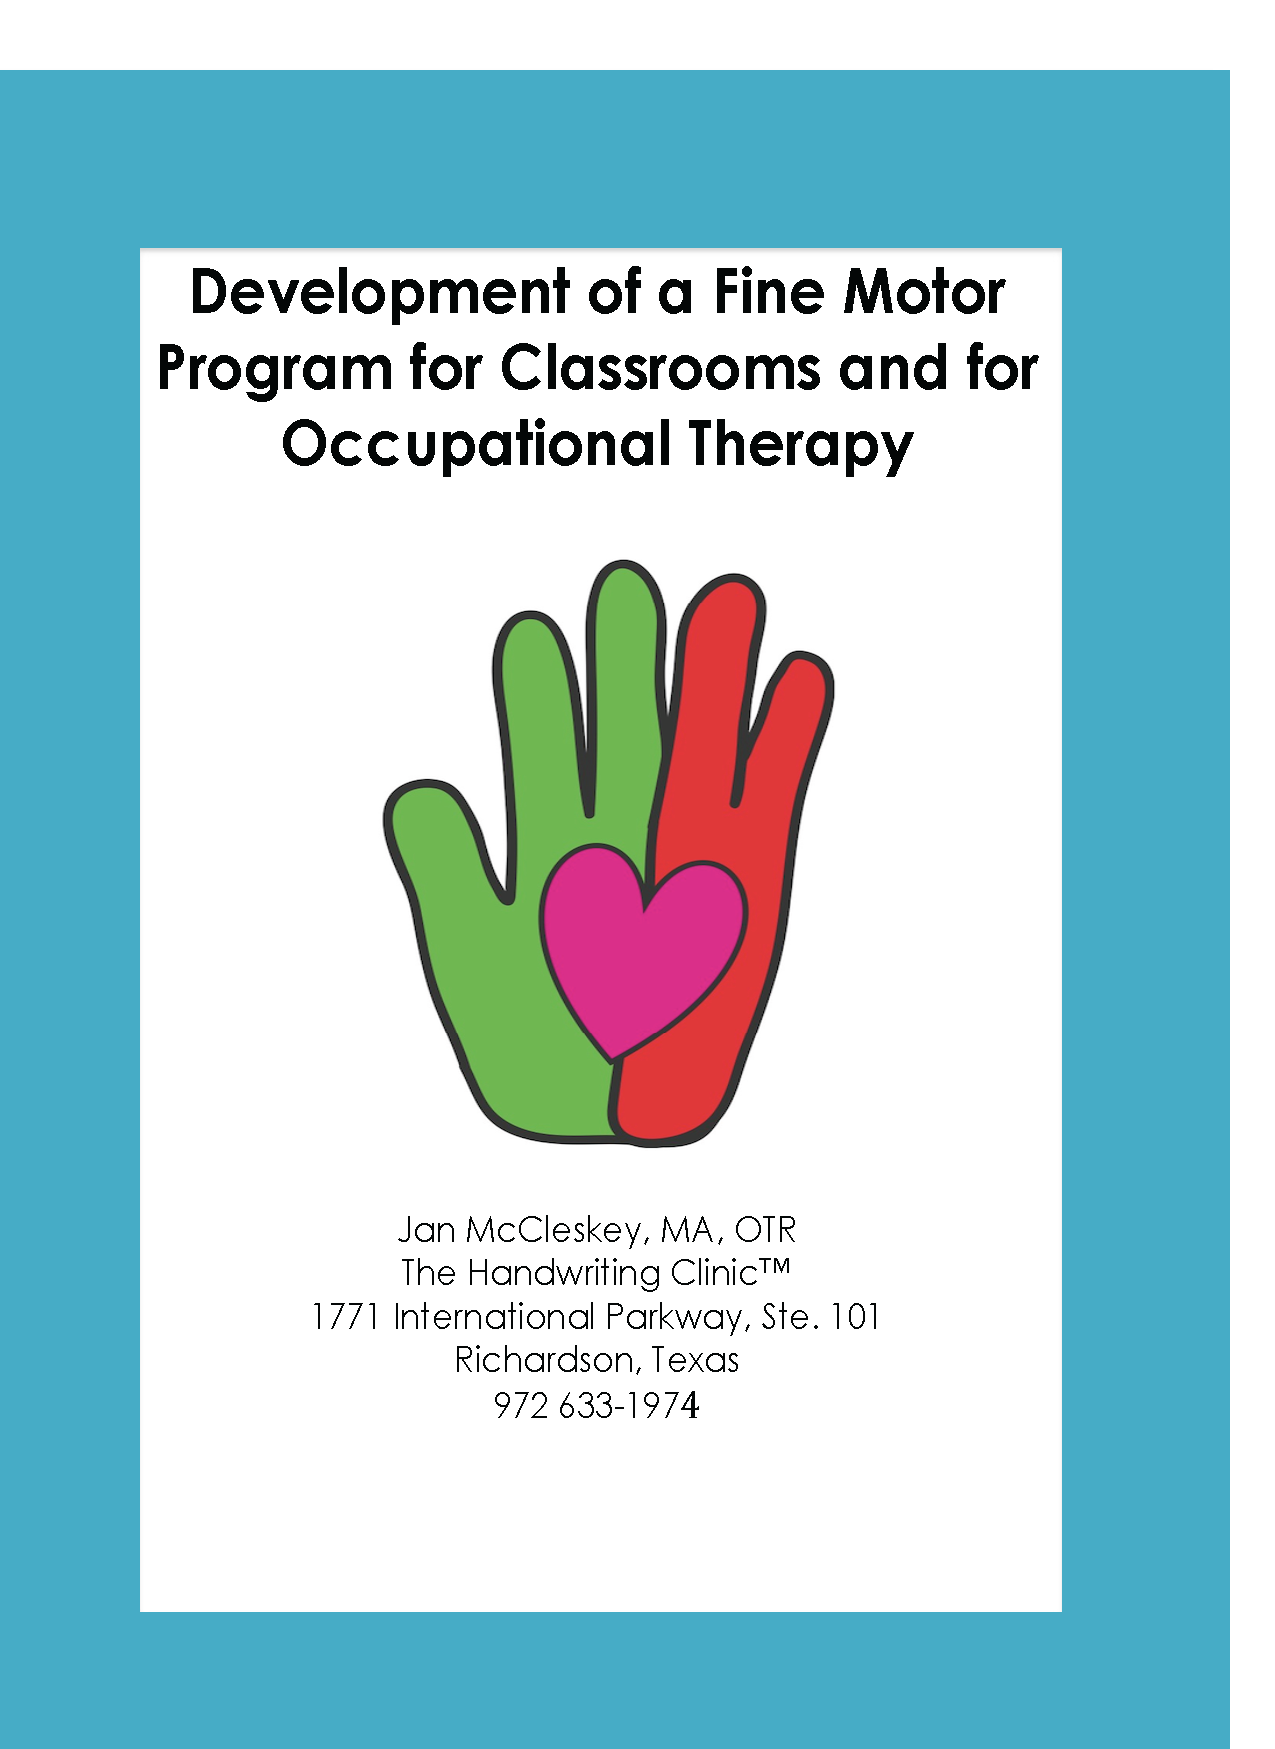 FS Developing a Fine Motor Program for Classrooms or Occupational Therapy